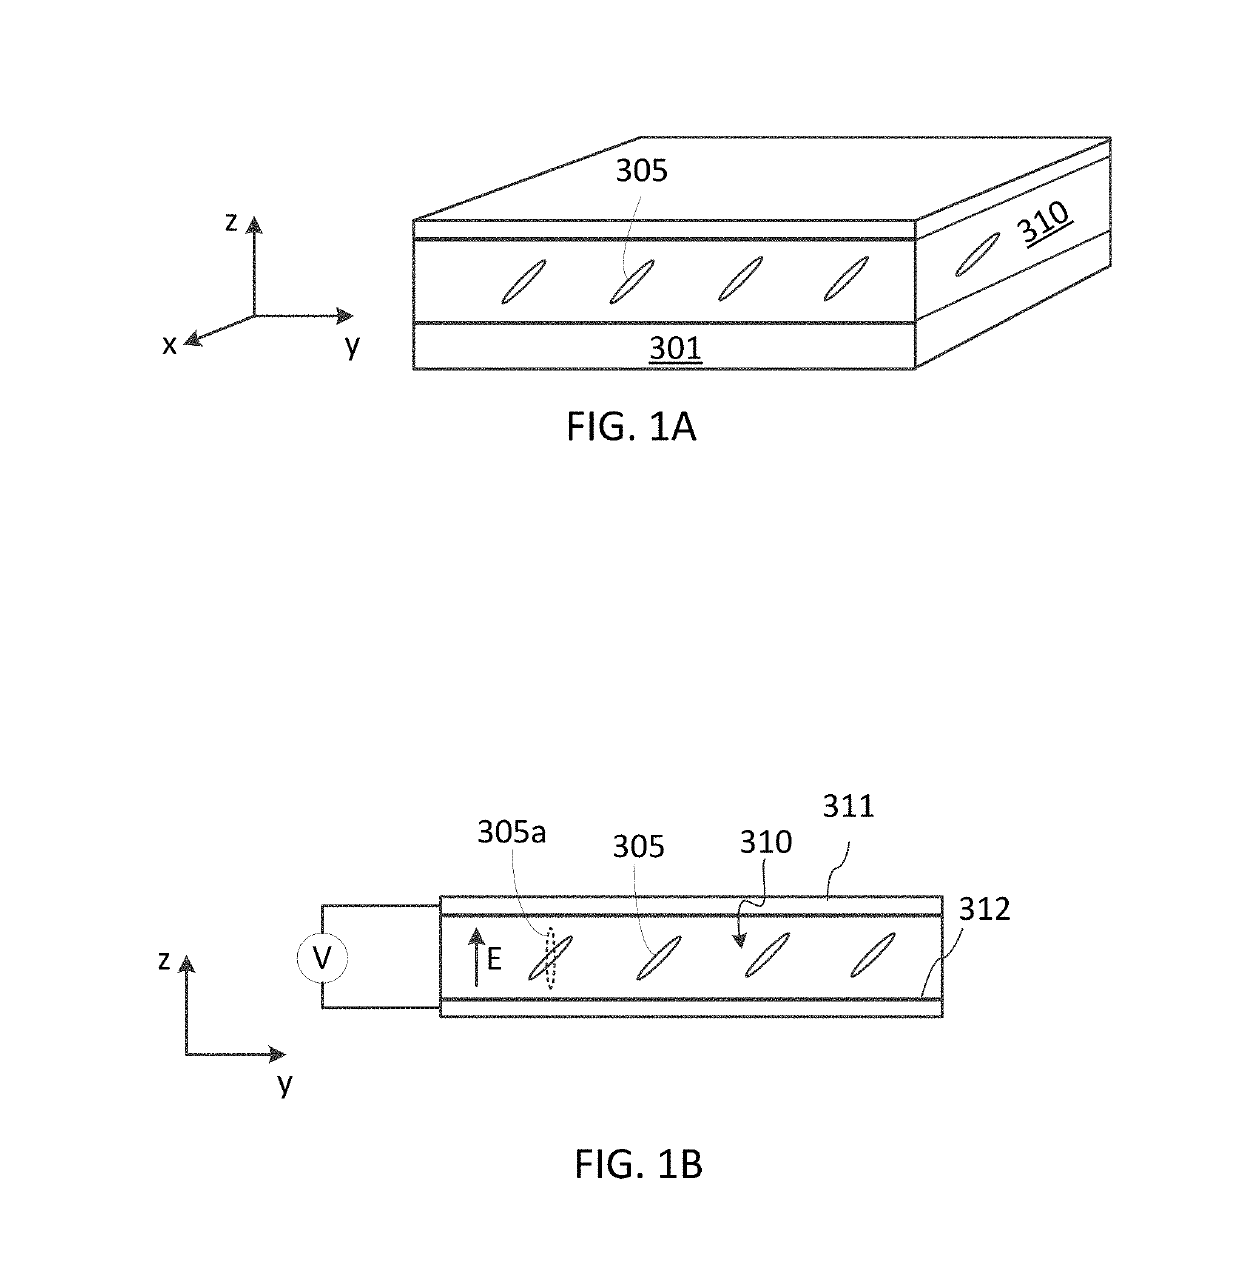 Display device with dynamic resolution enhancement